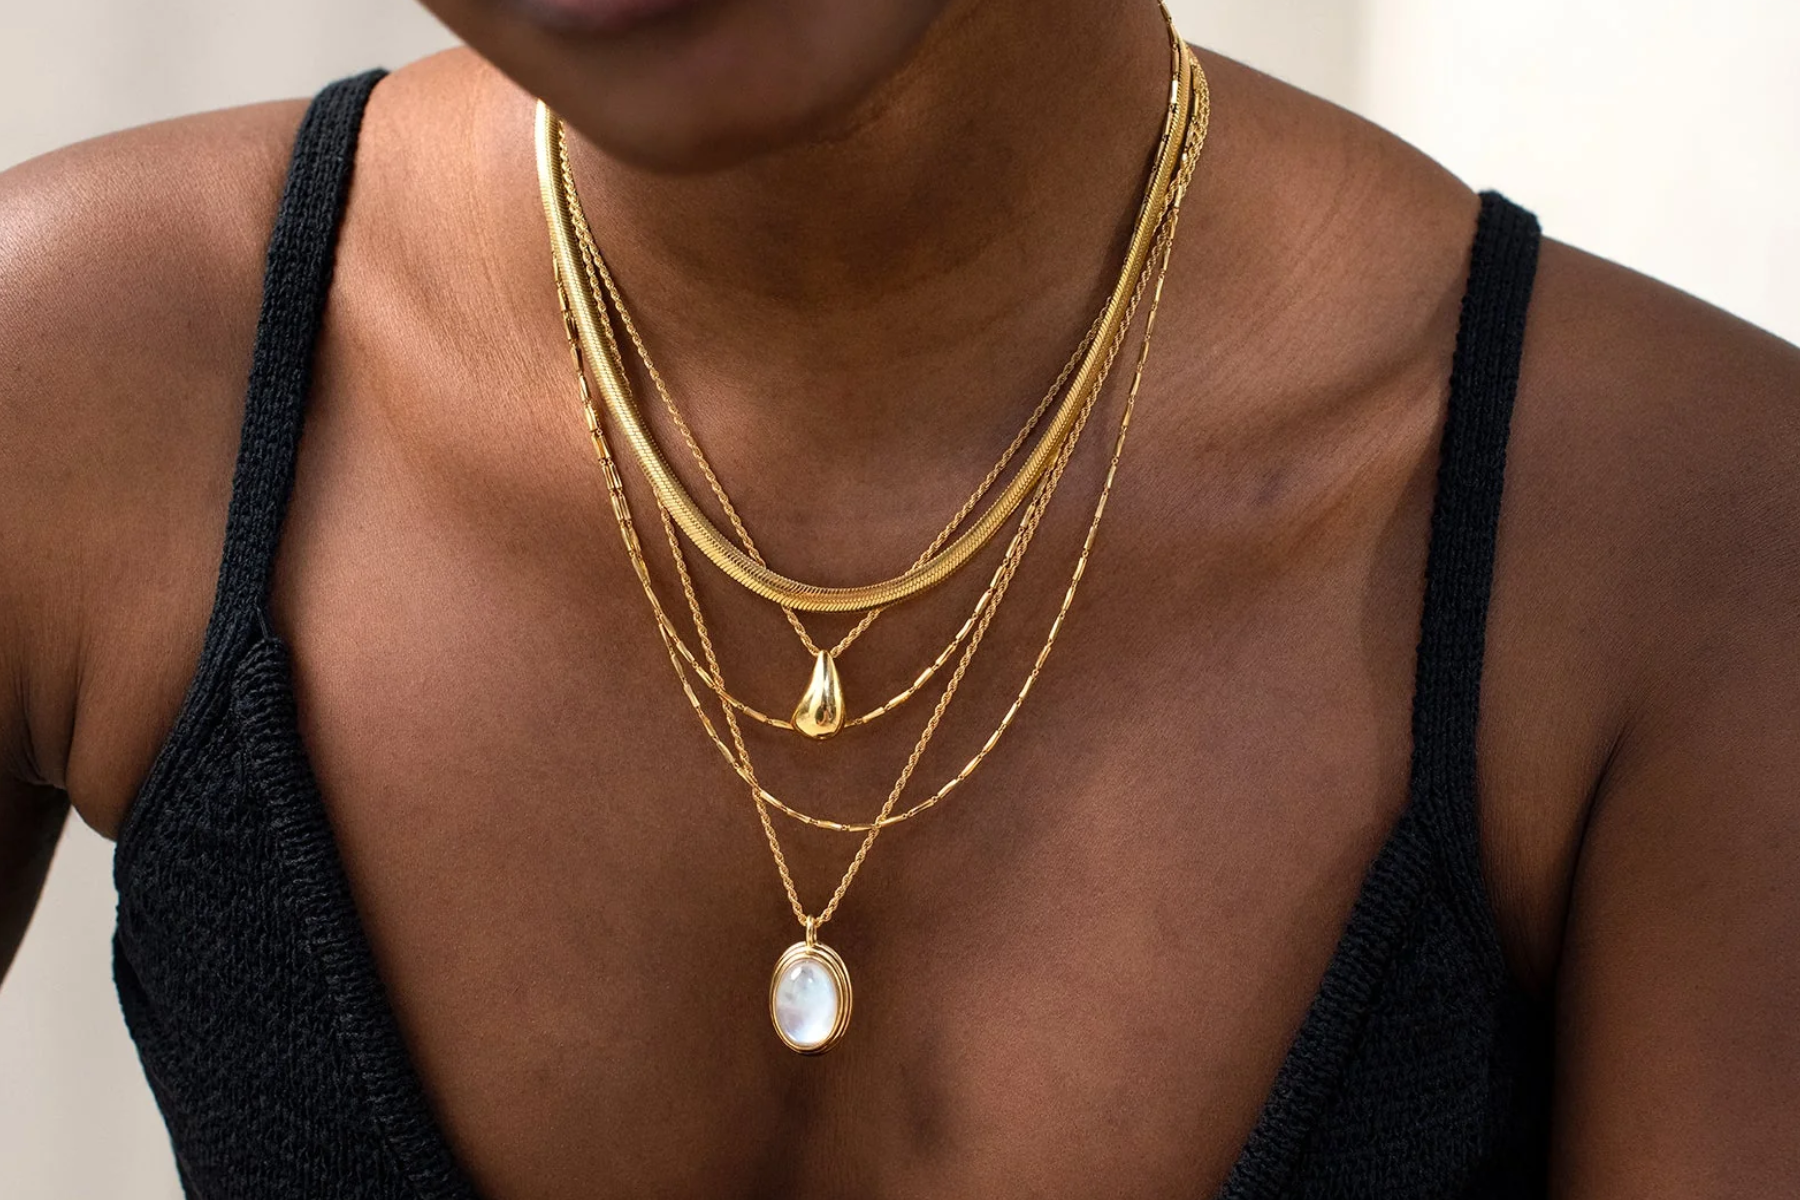 Layered Chain Necklaces For Women - Get The Look